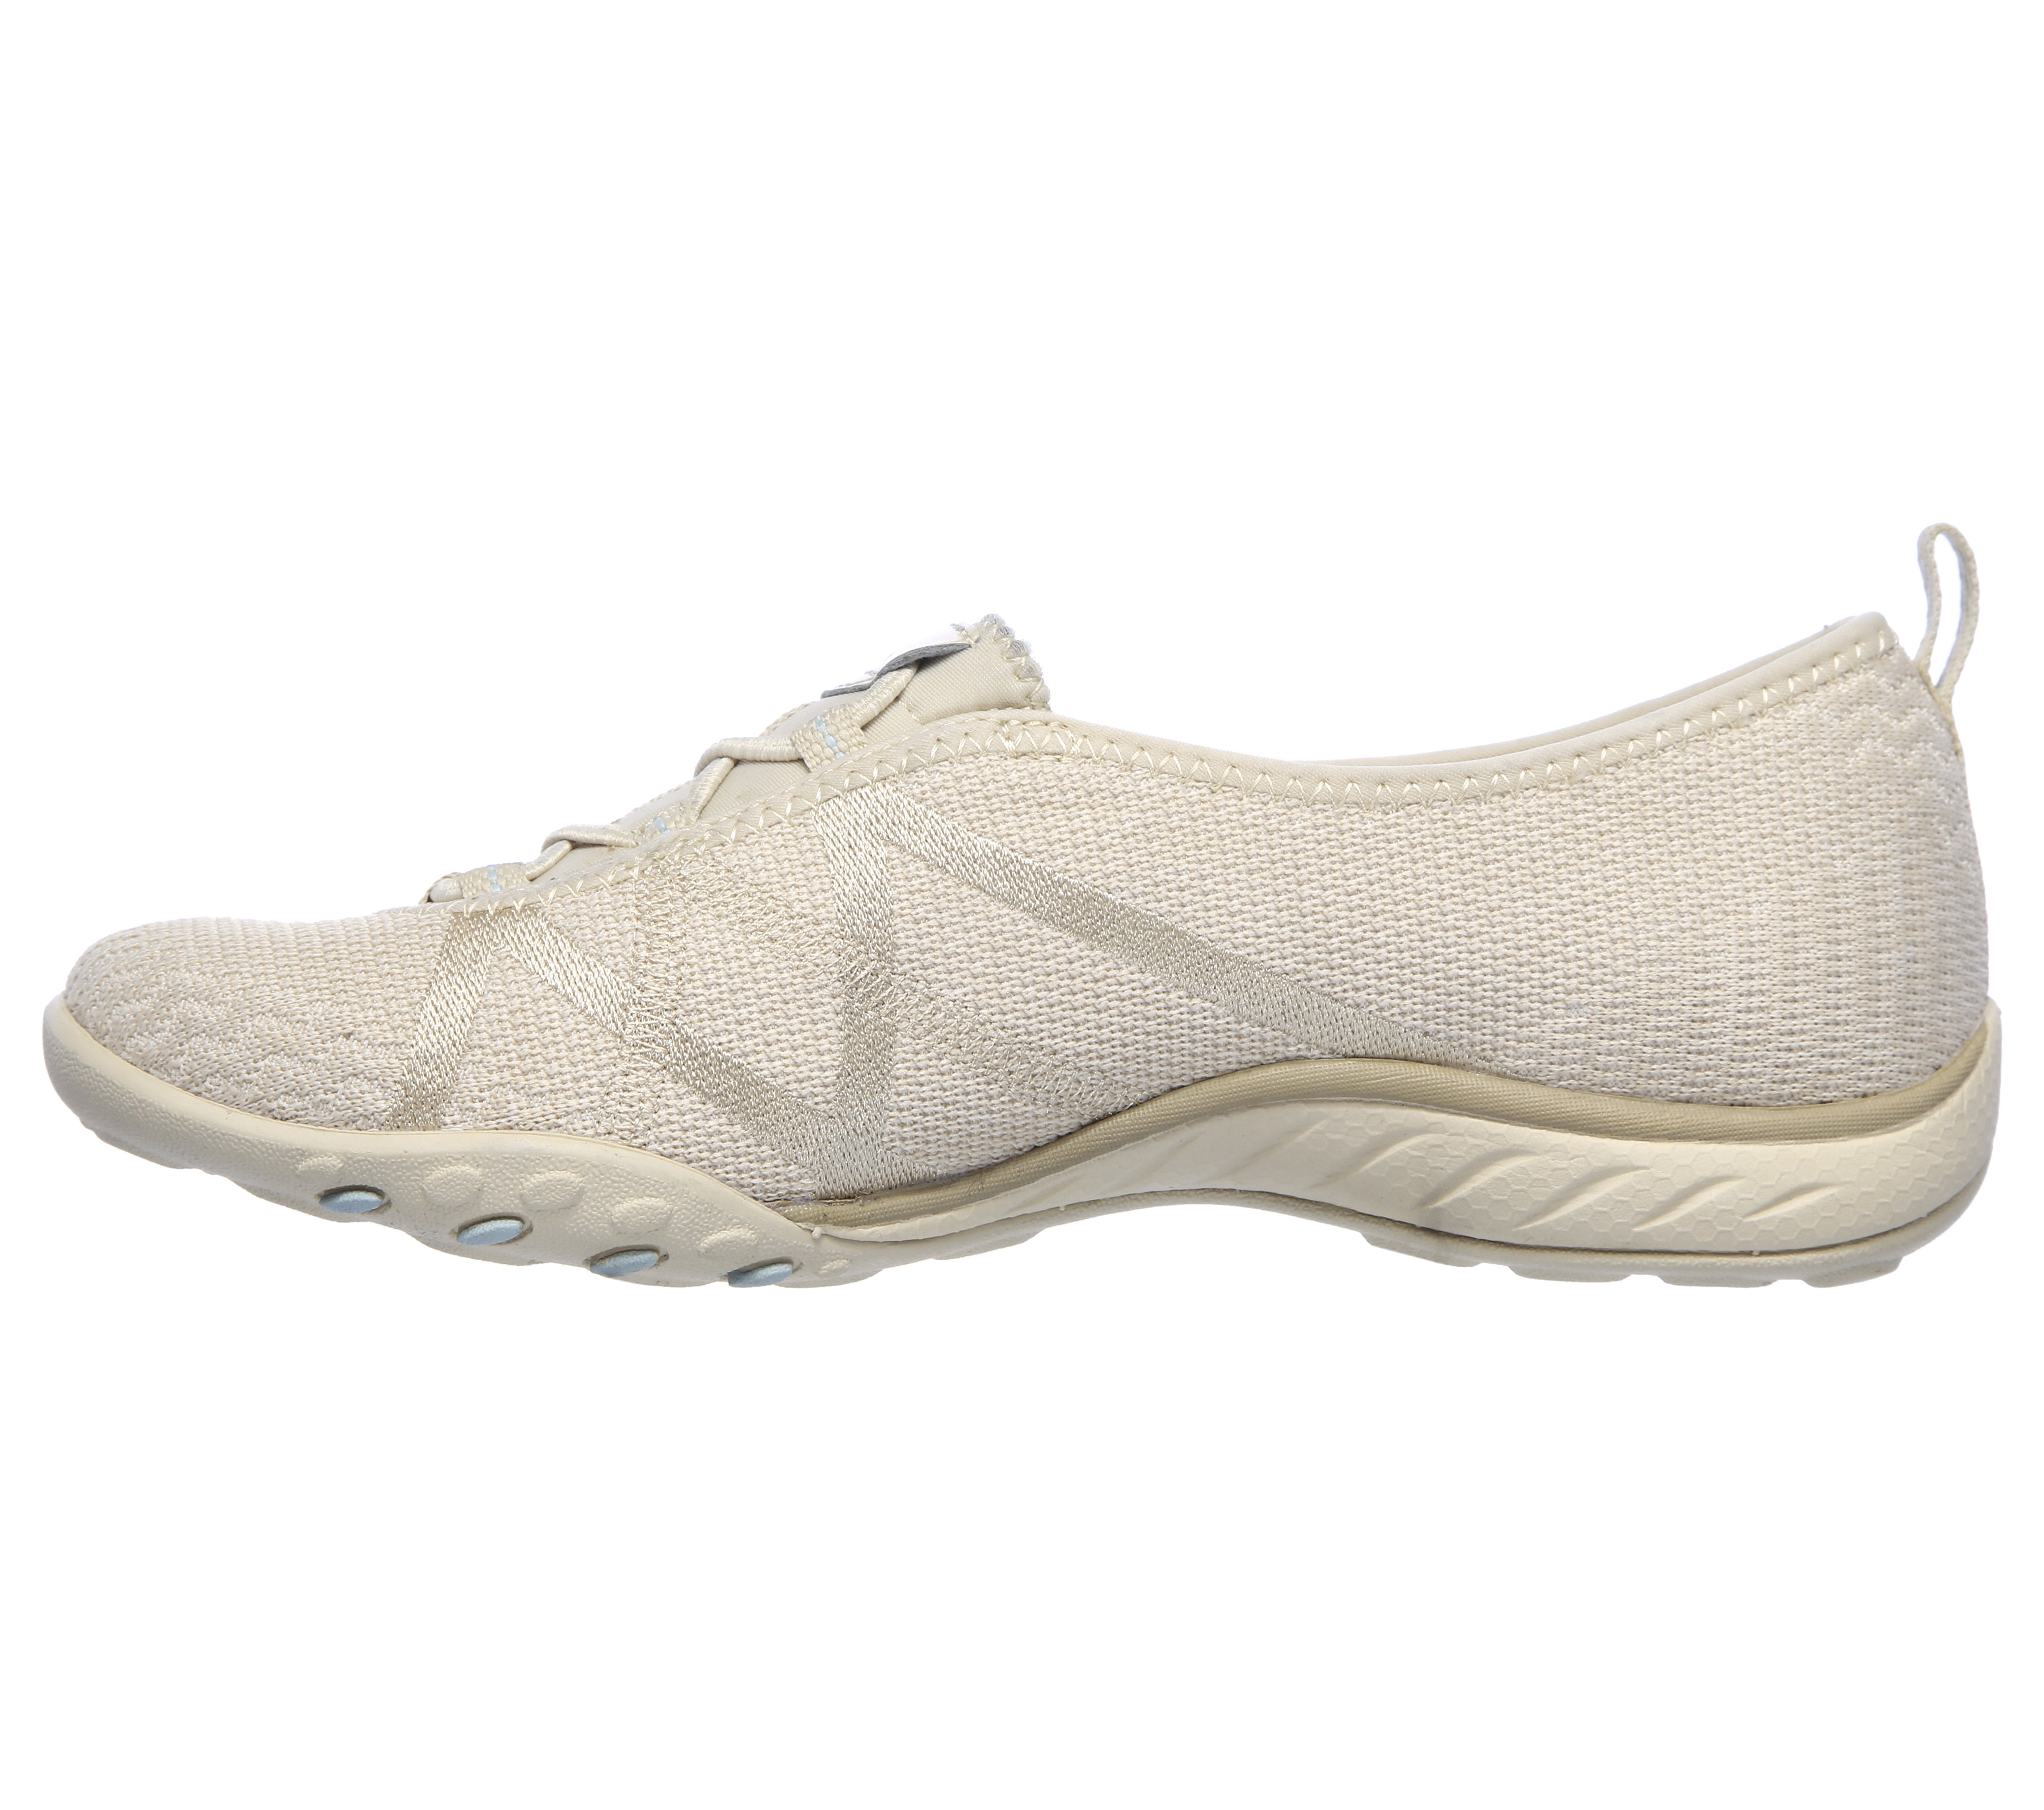 Shop the Relaxed Fit: Breathe-Easy | SKECHERS